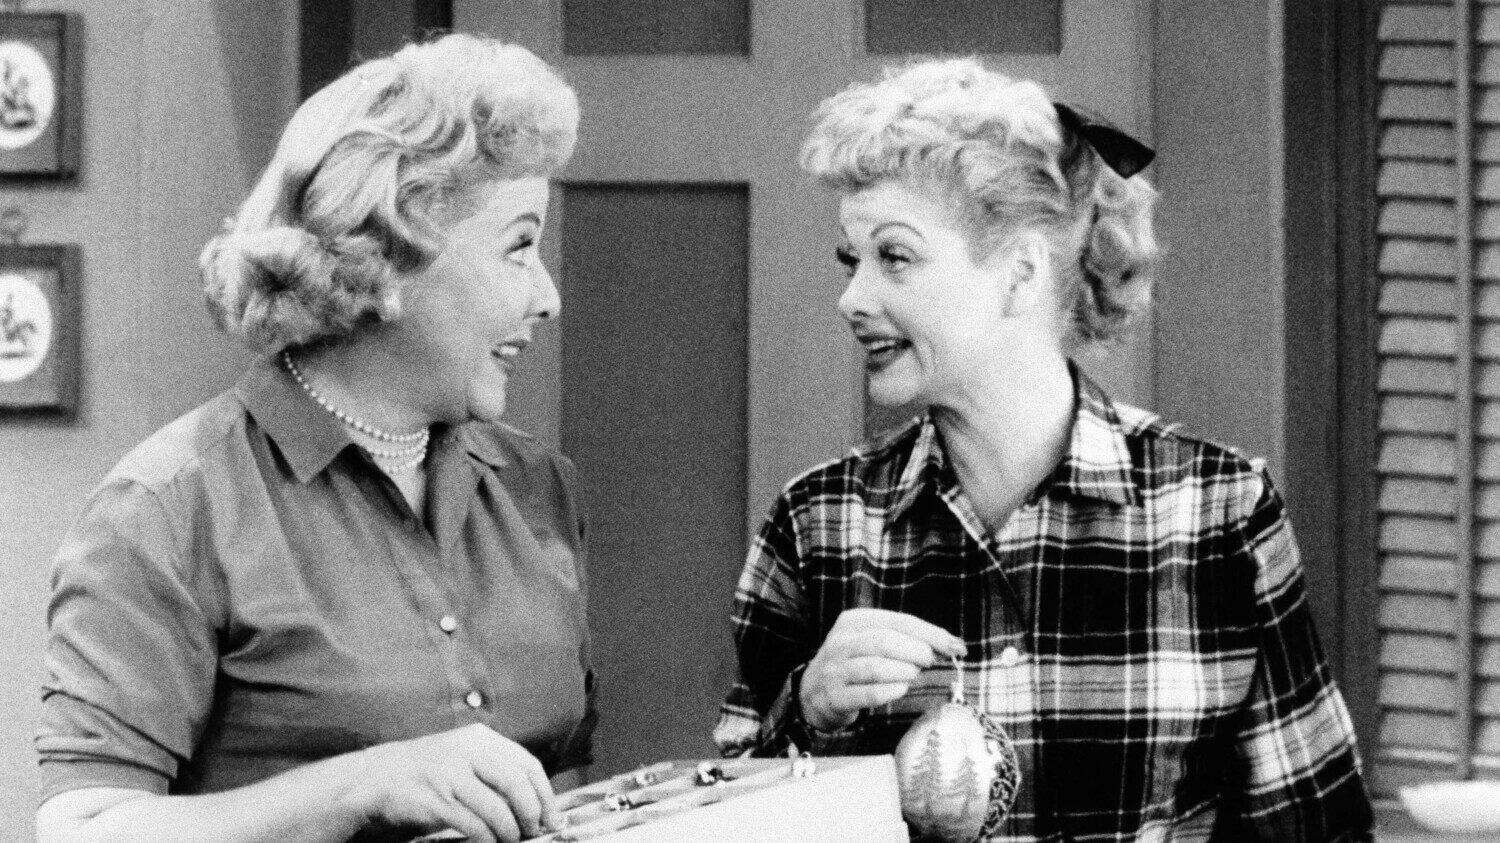 Vivian Vance and Lucille Ball on "I Love Lucy"